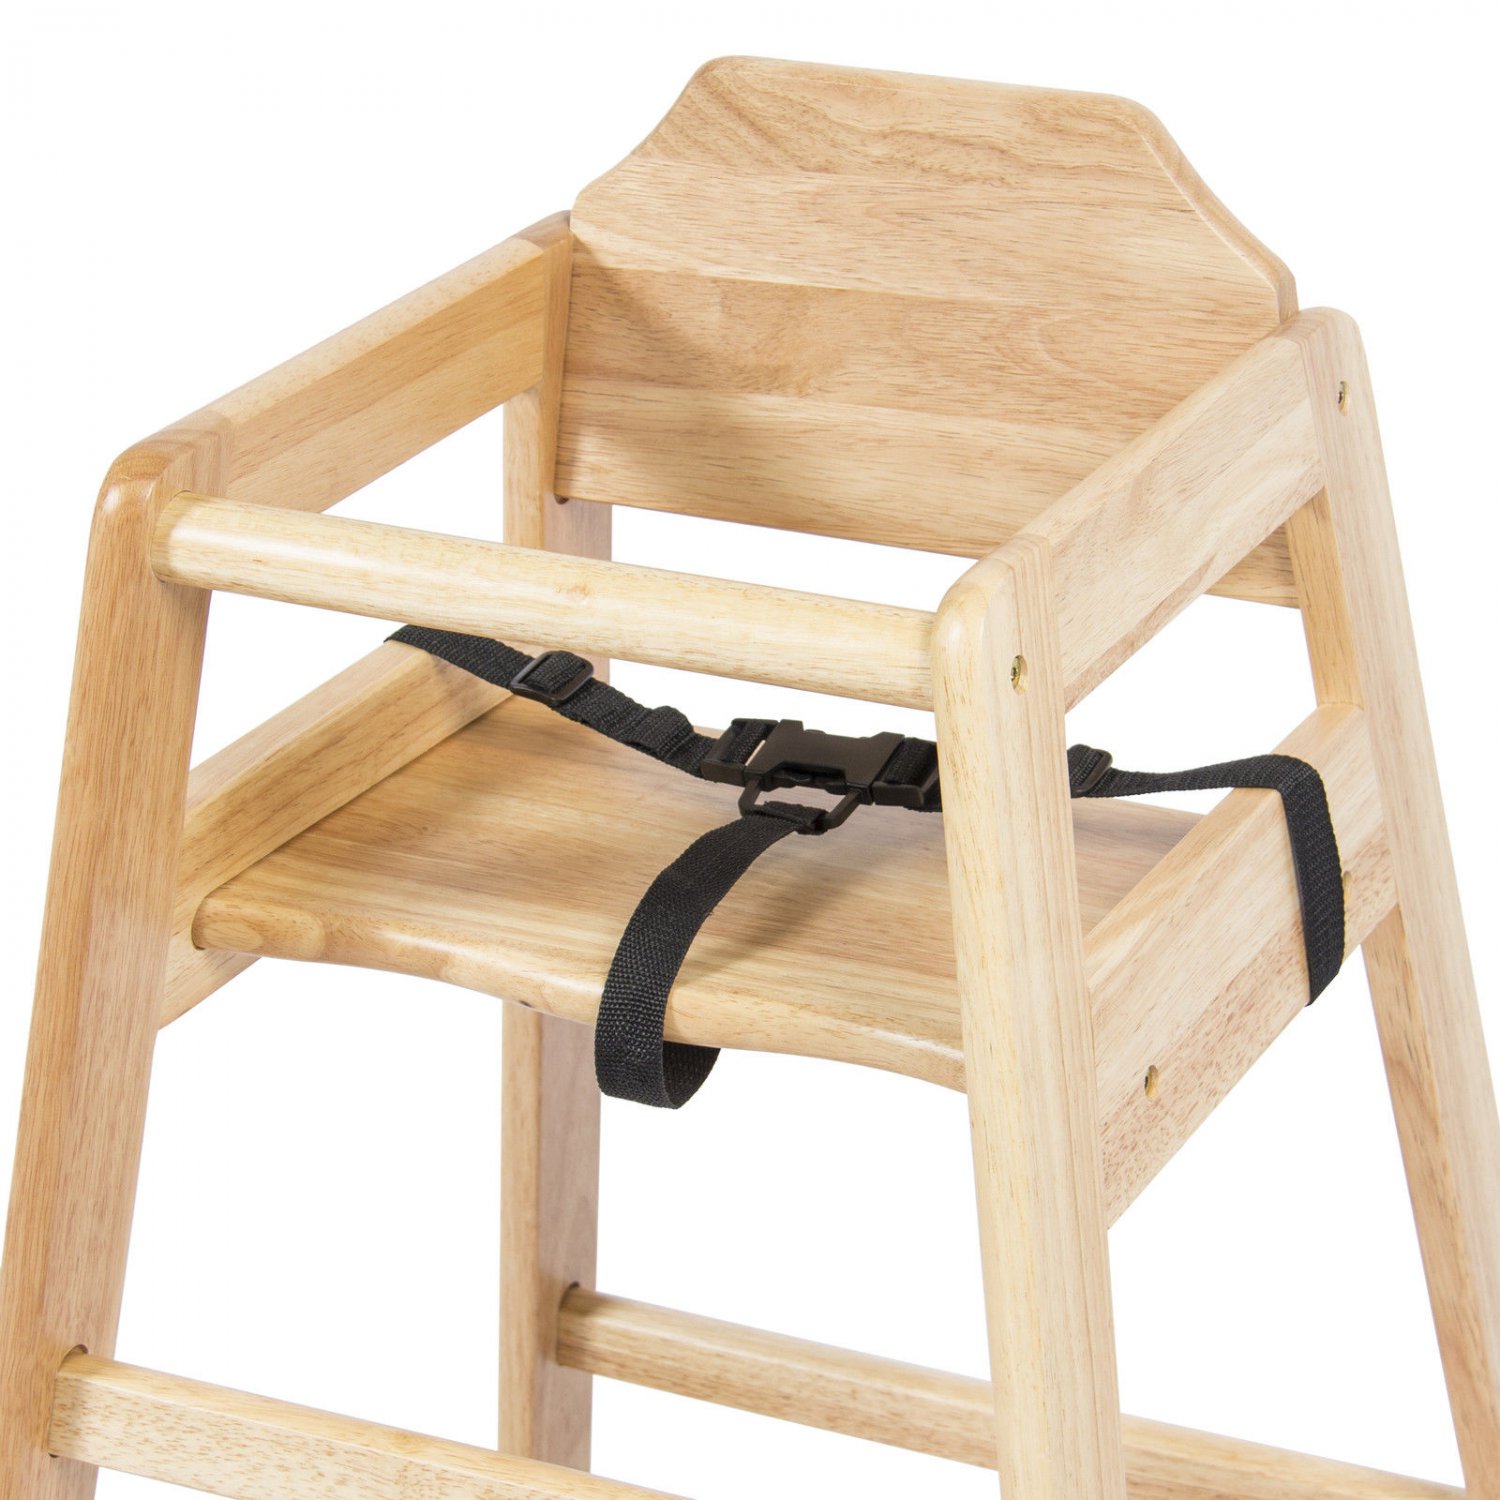 Restaurant Booster Chair : Best restaurant table booster seat - Your